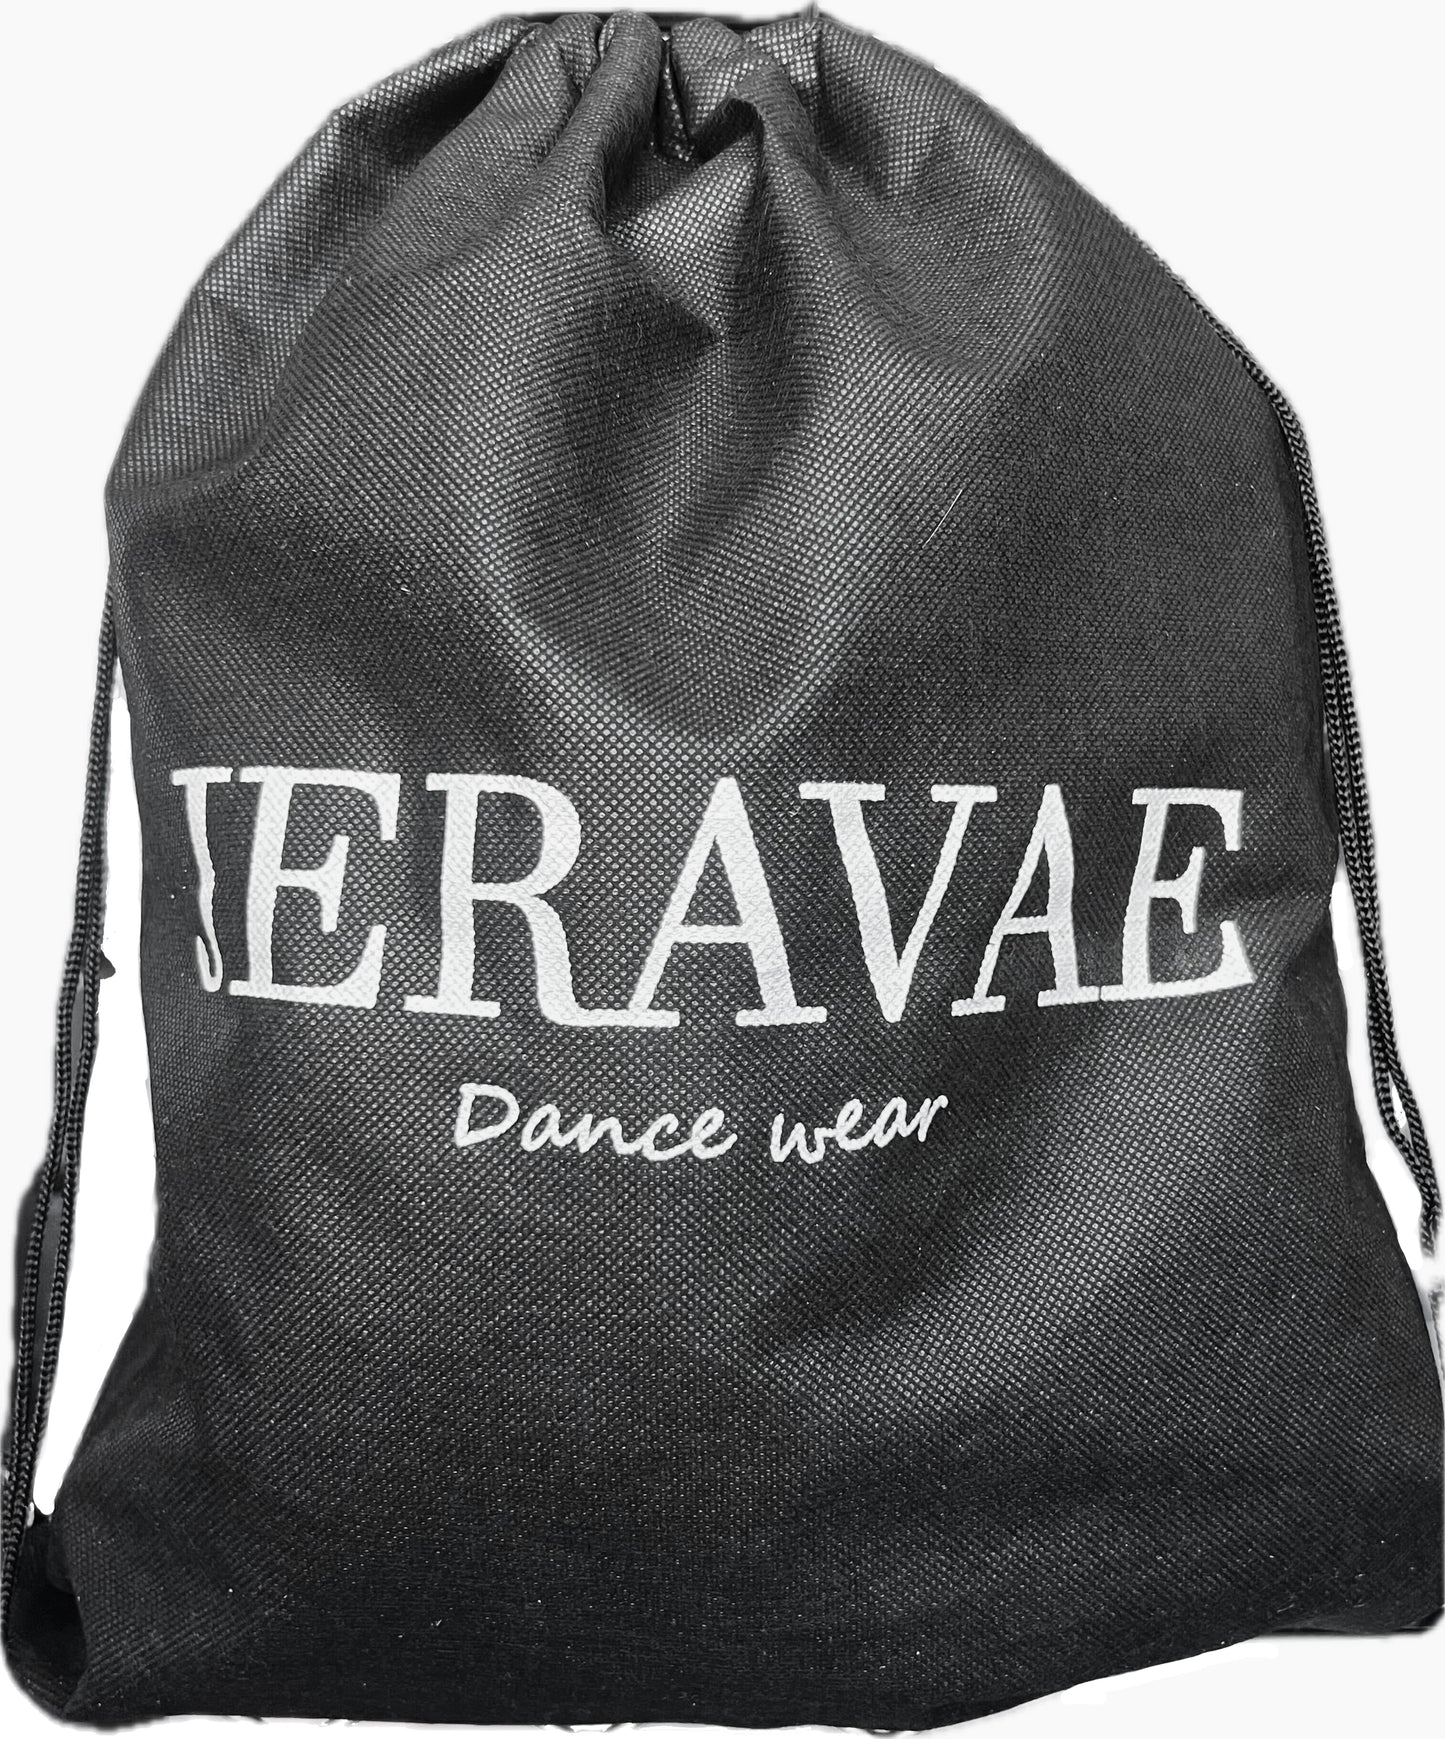 JERAVAE Dancewear Large Carry All Bag Dance Shoe Bag with Backpack Pull Strings in Black with White Logo